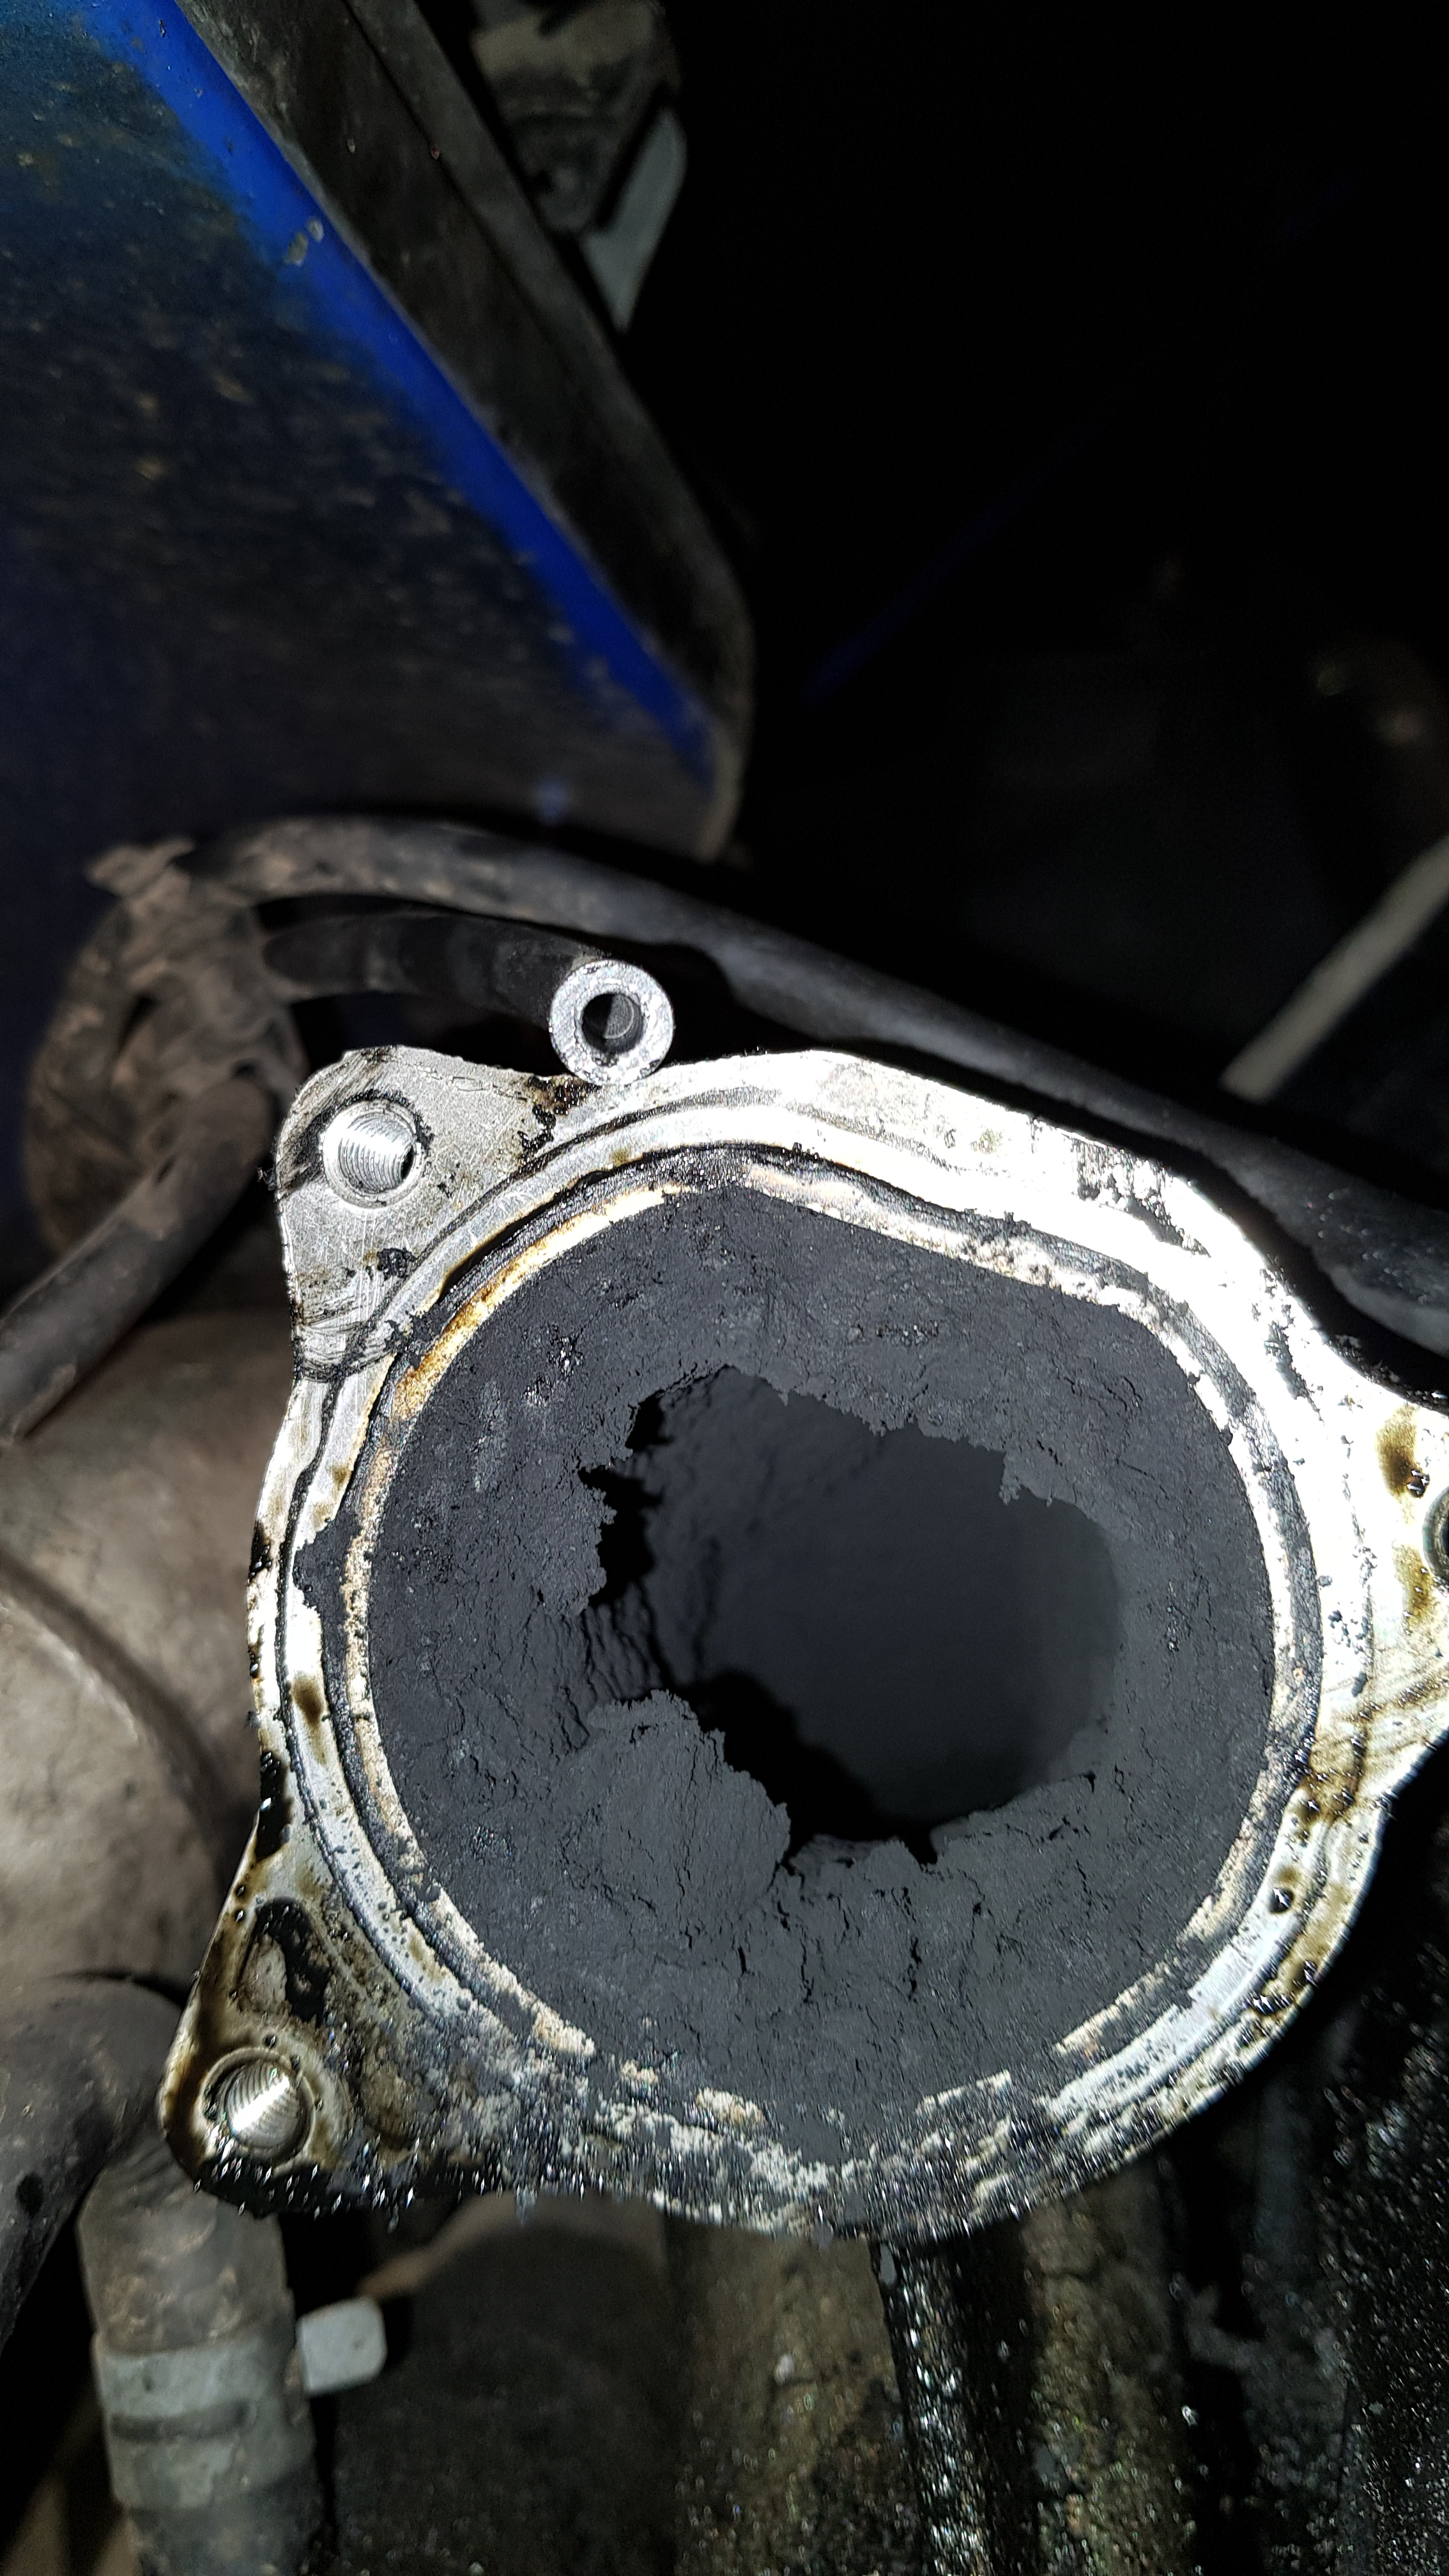 EGR Delete - worth it or not? - Page 2 - General Gassing - PistonHeads